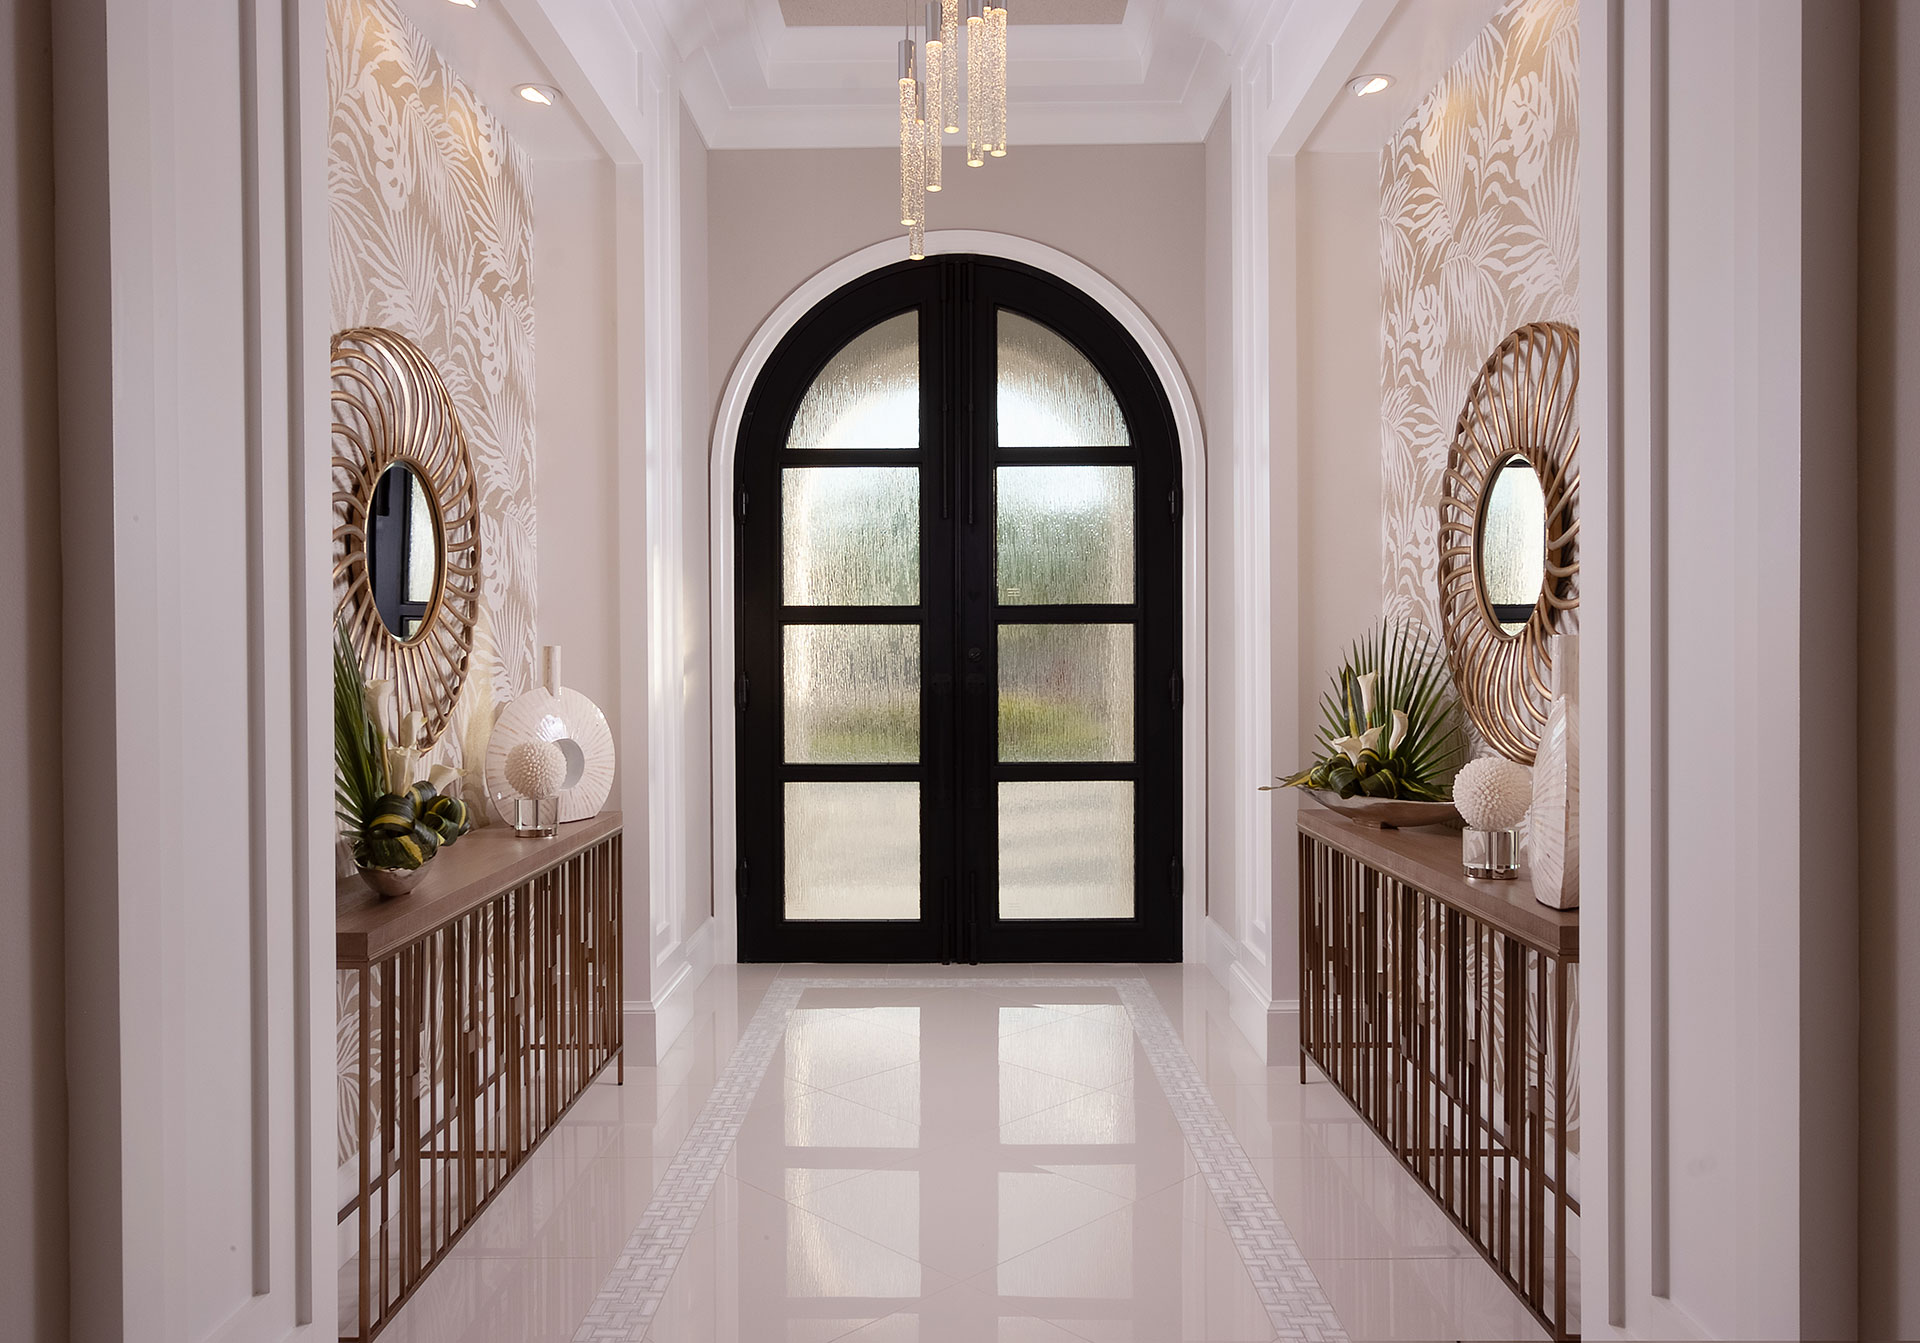 How To Decorate Your Entry Way